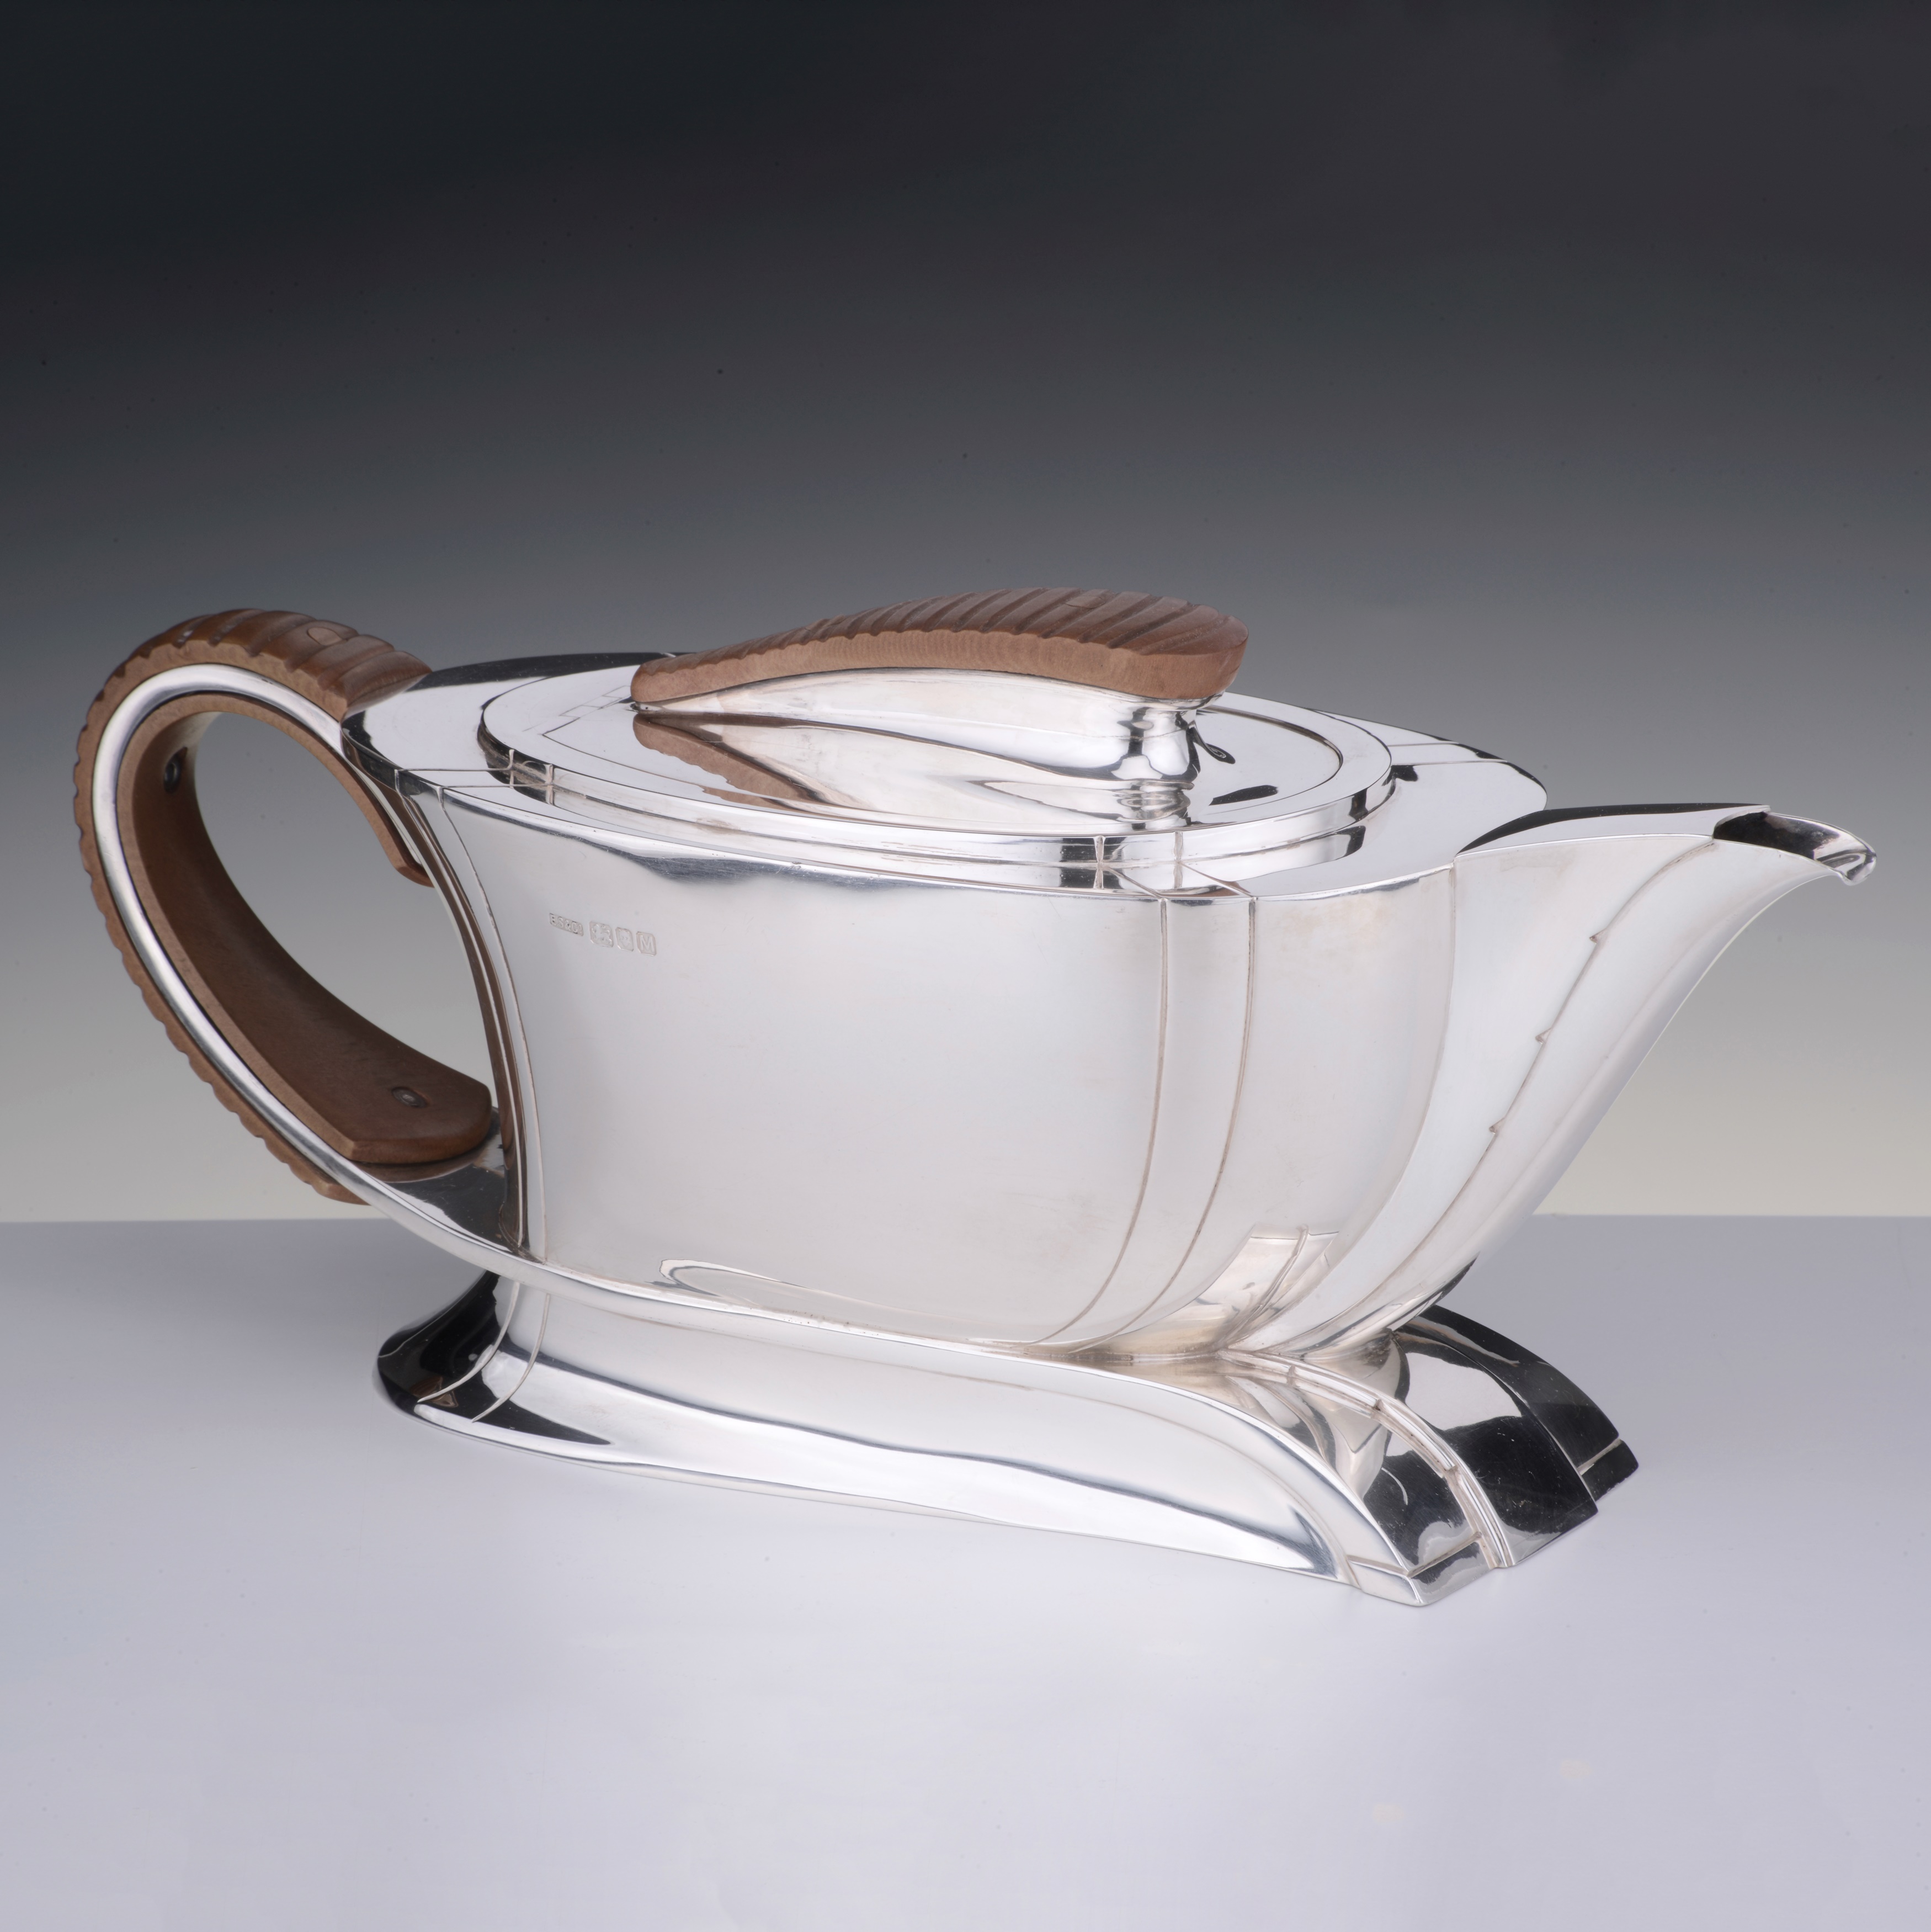 Teapot by E. Silver and Co